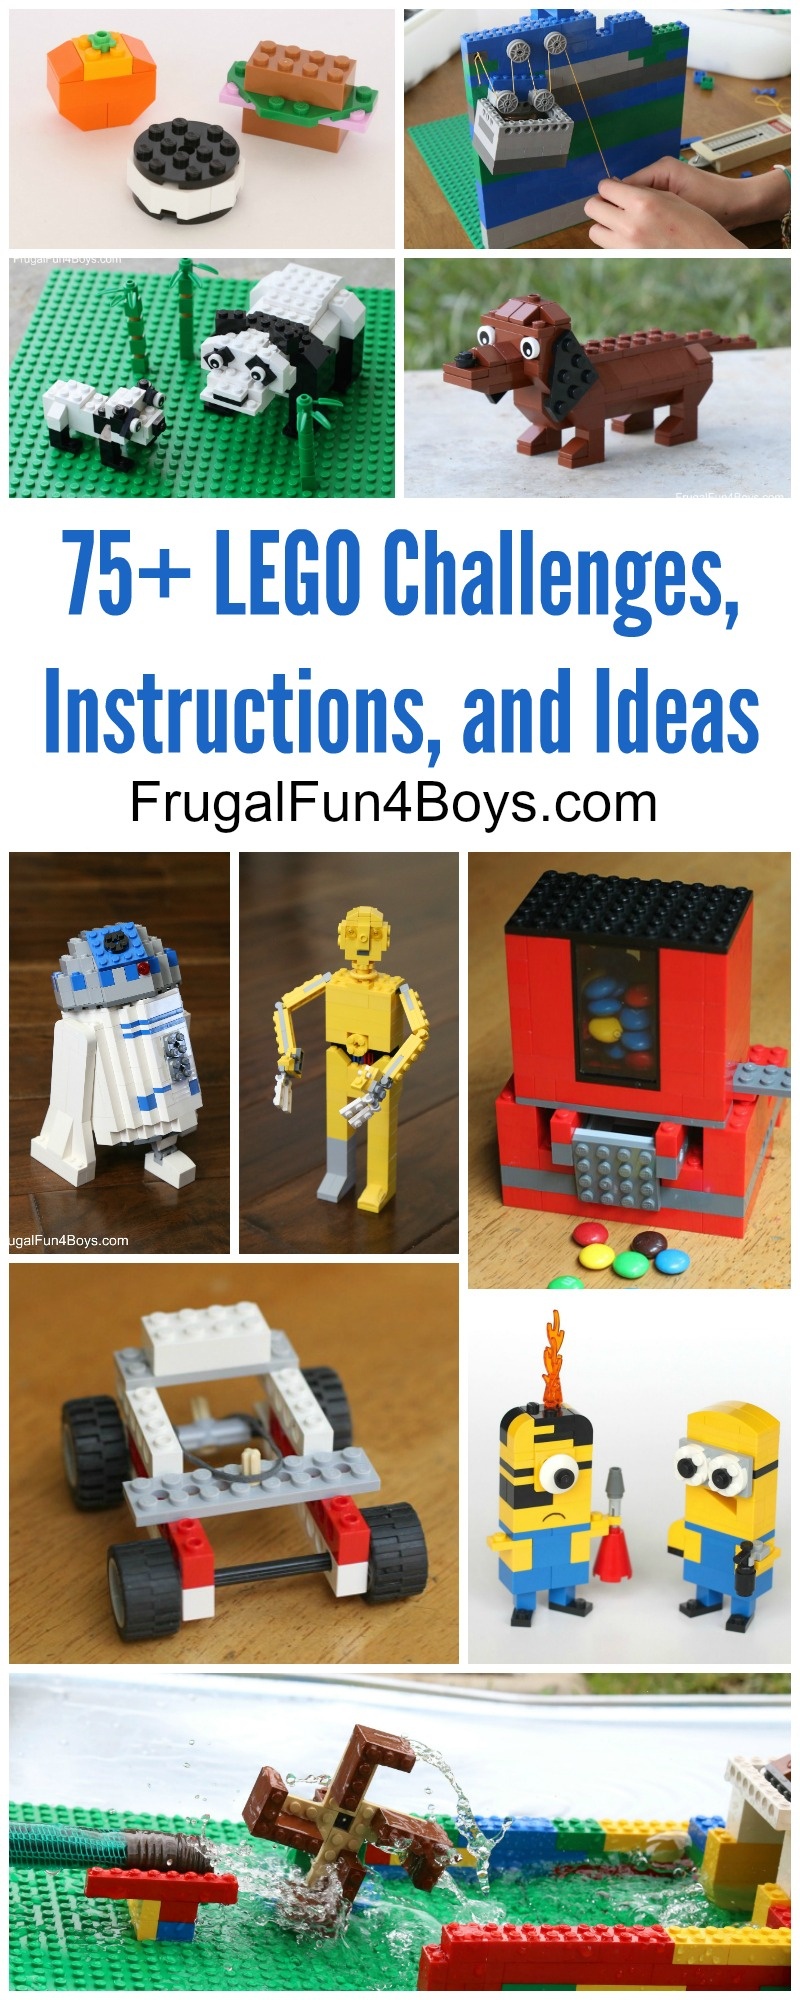 75+ Lego Building Projects For Kids - Frugal Fun For Boys And Girls - Free Printable Lego Instructions